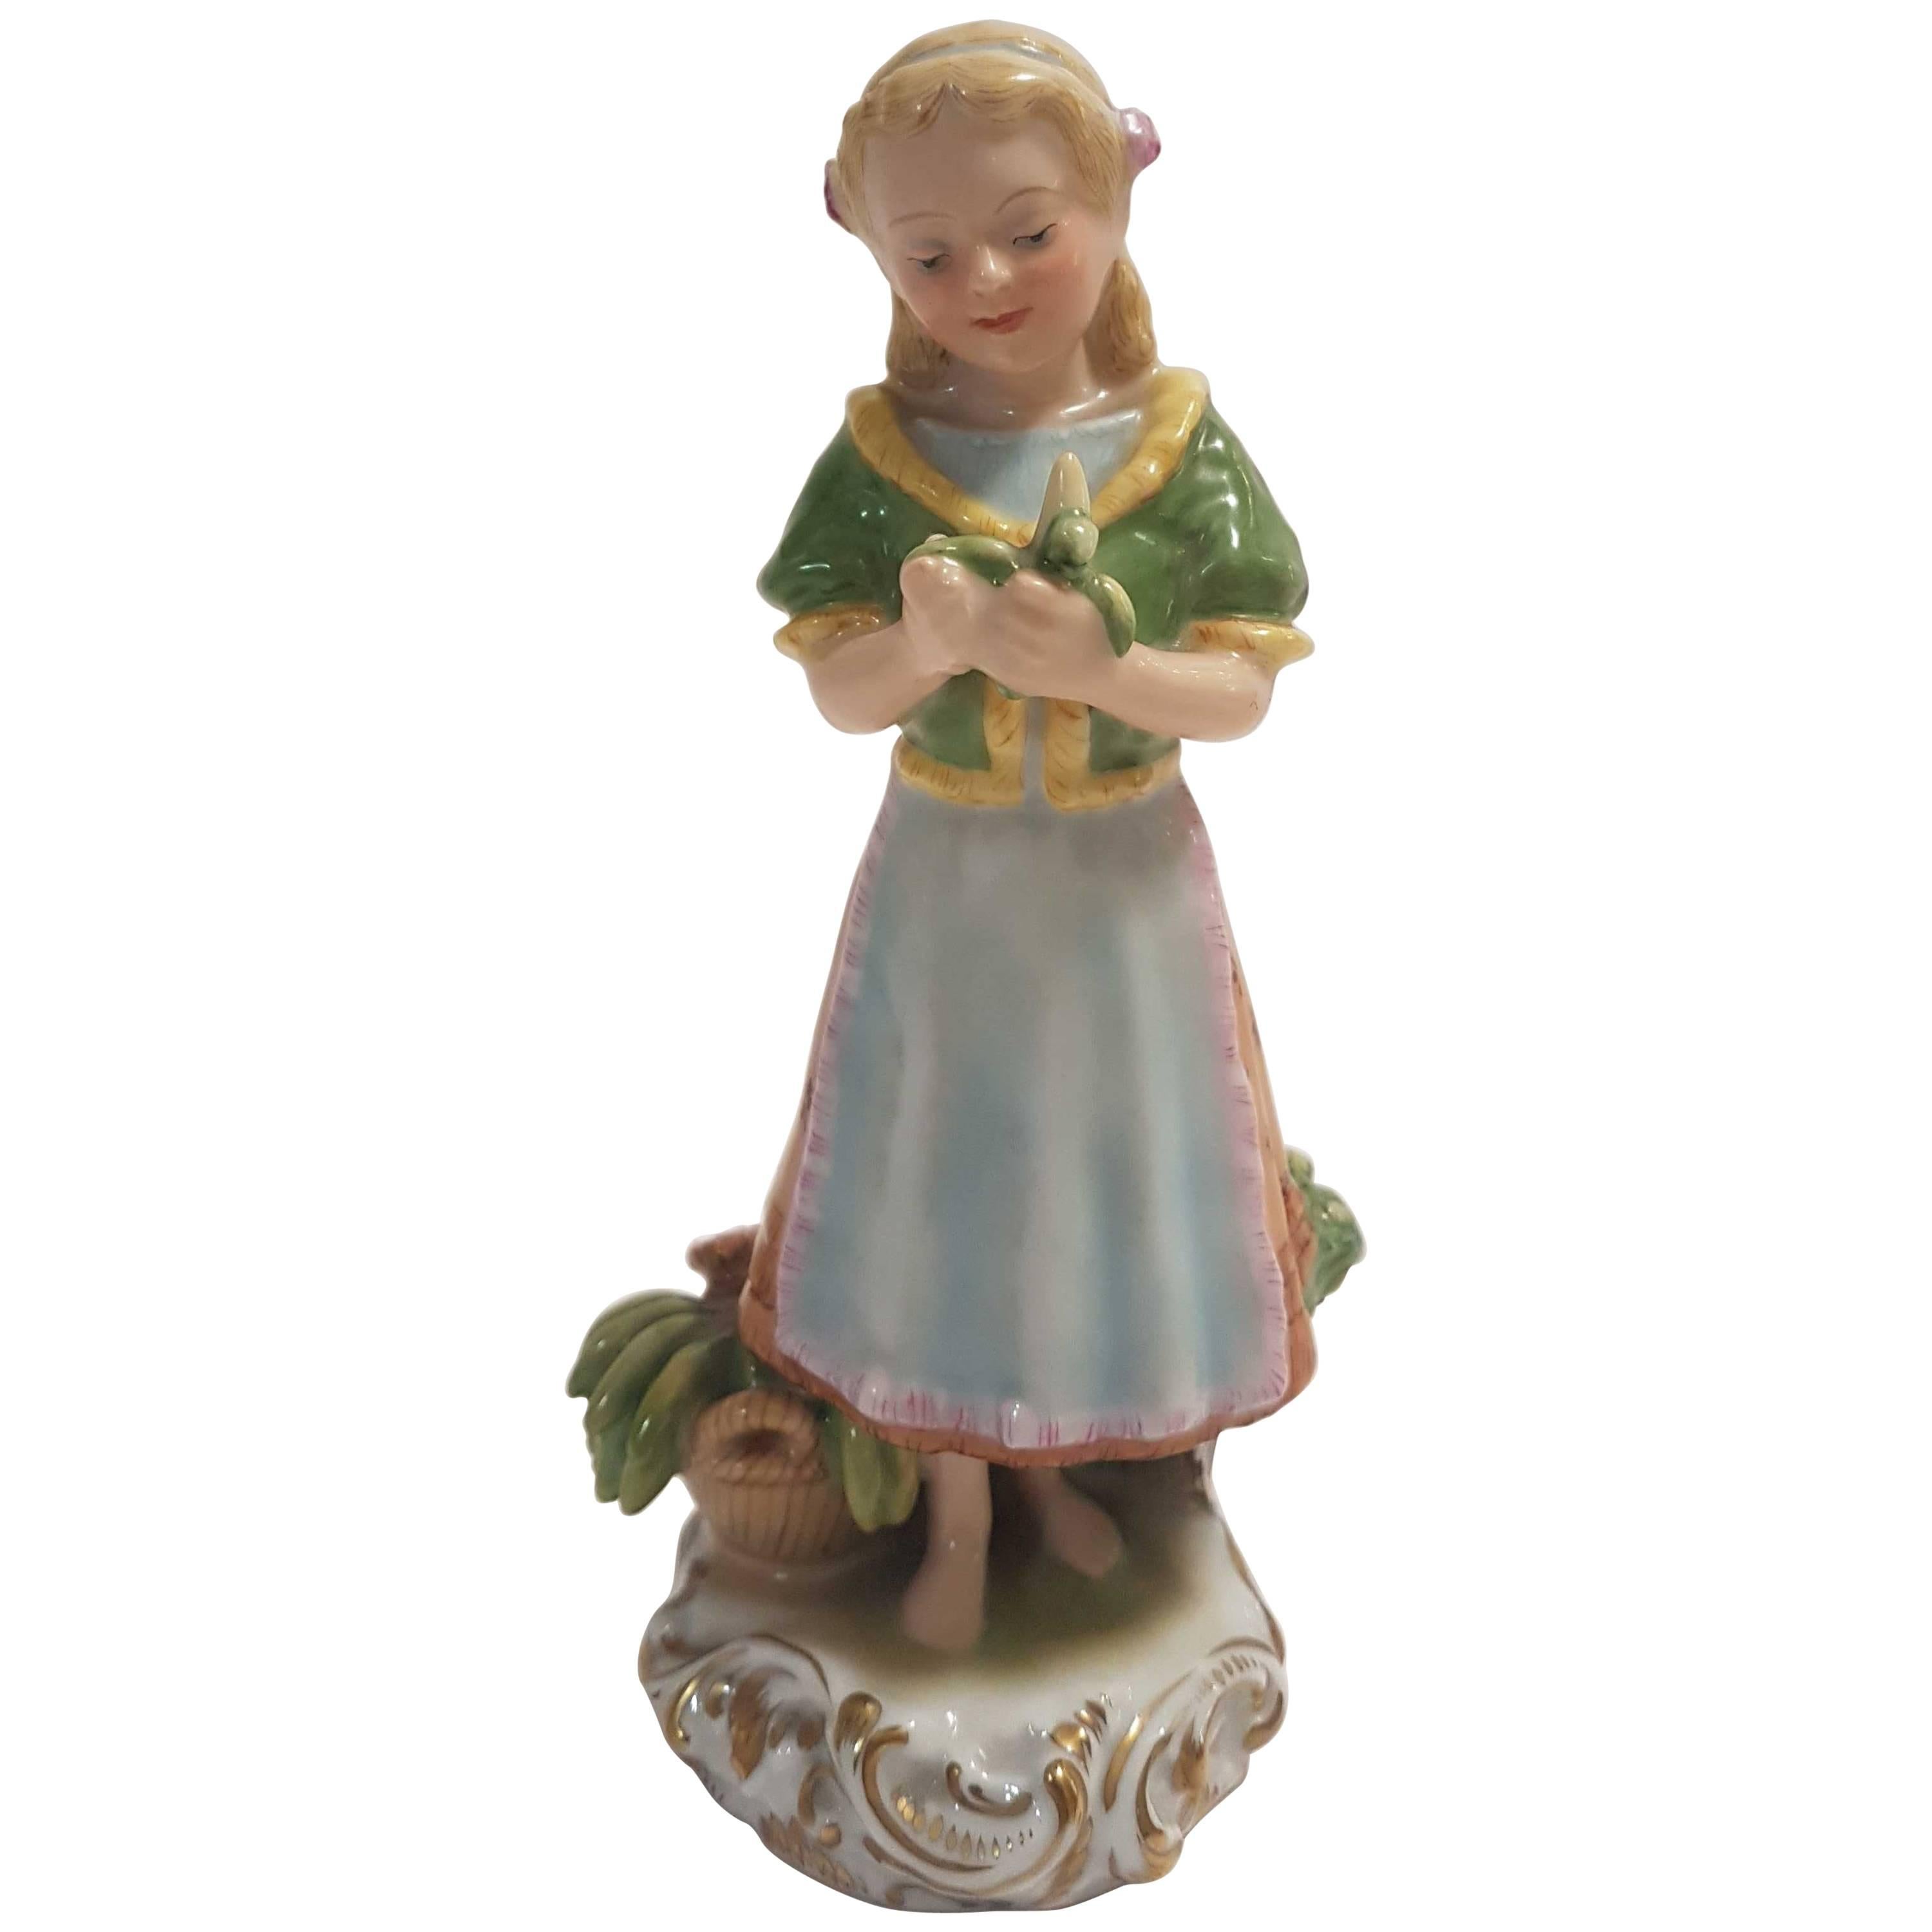 Herend Hand-Painted Hungarian Porcelain Figurine Representing a Fruit Vendor 